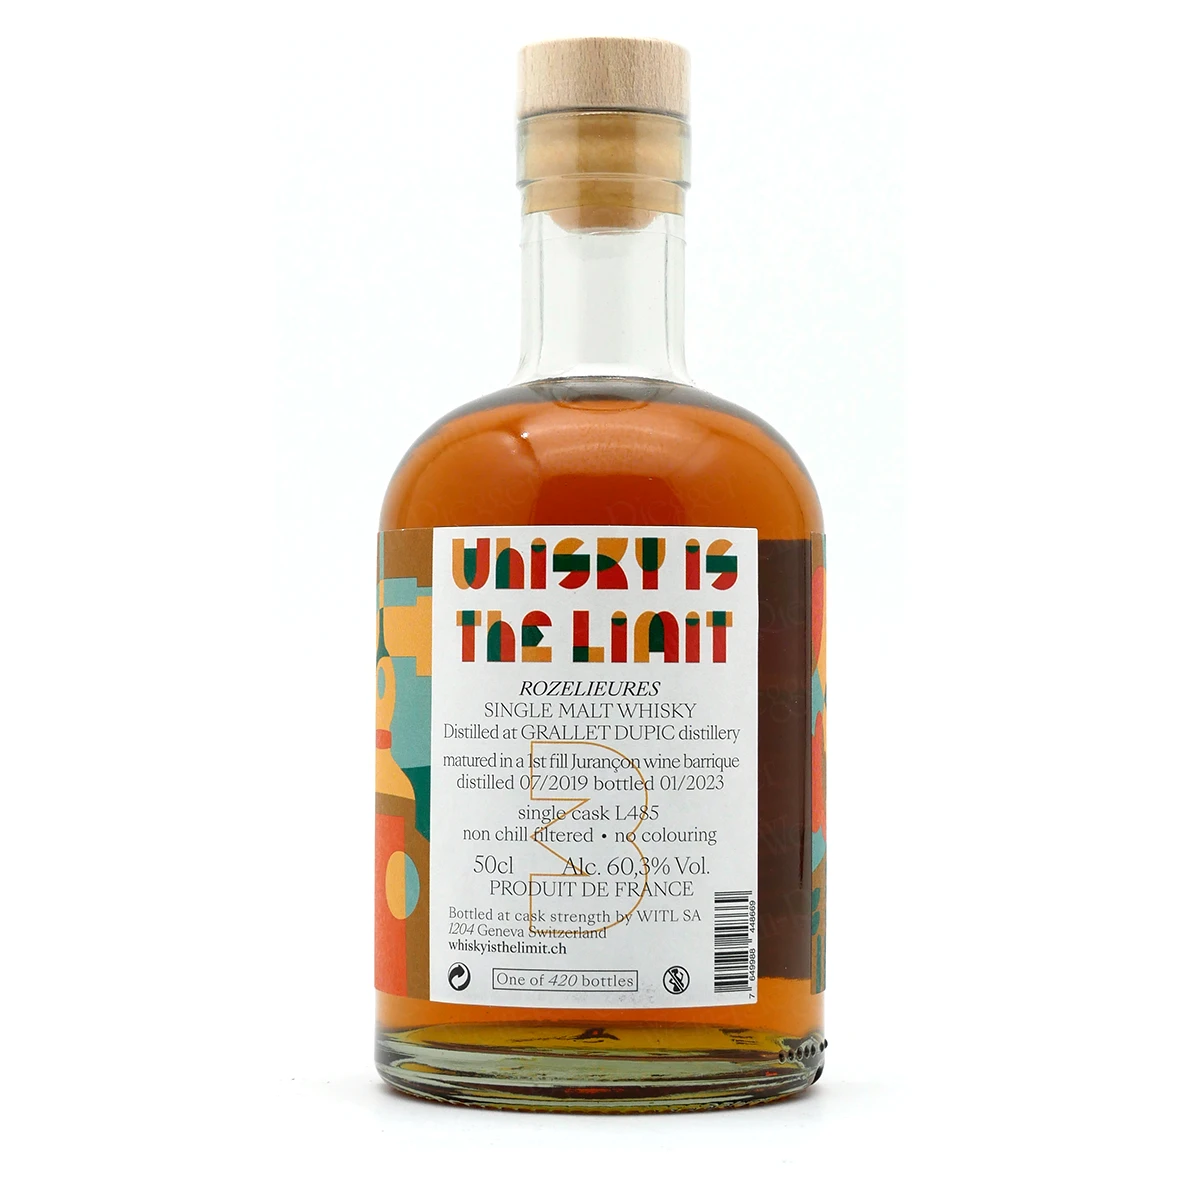 Rozelieures (Grallet Dupic) 3 Jahre 2019/2023 | WHISKY IS THE LIMIT